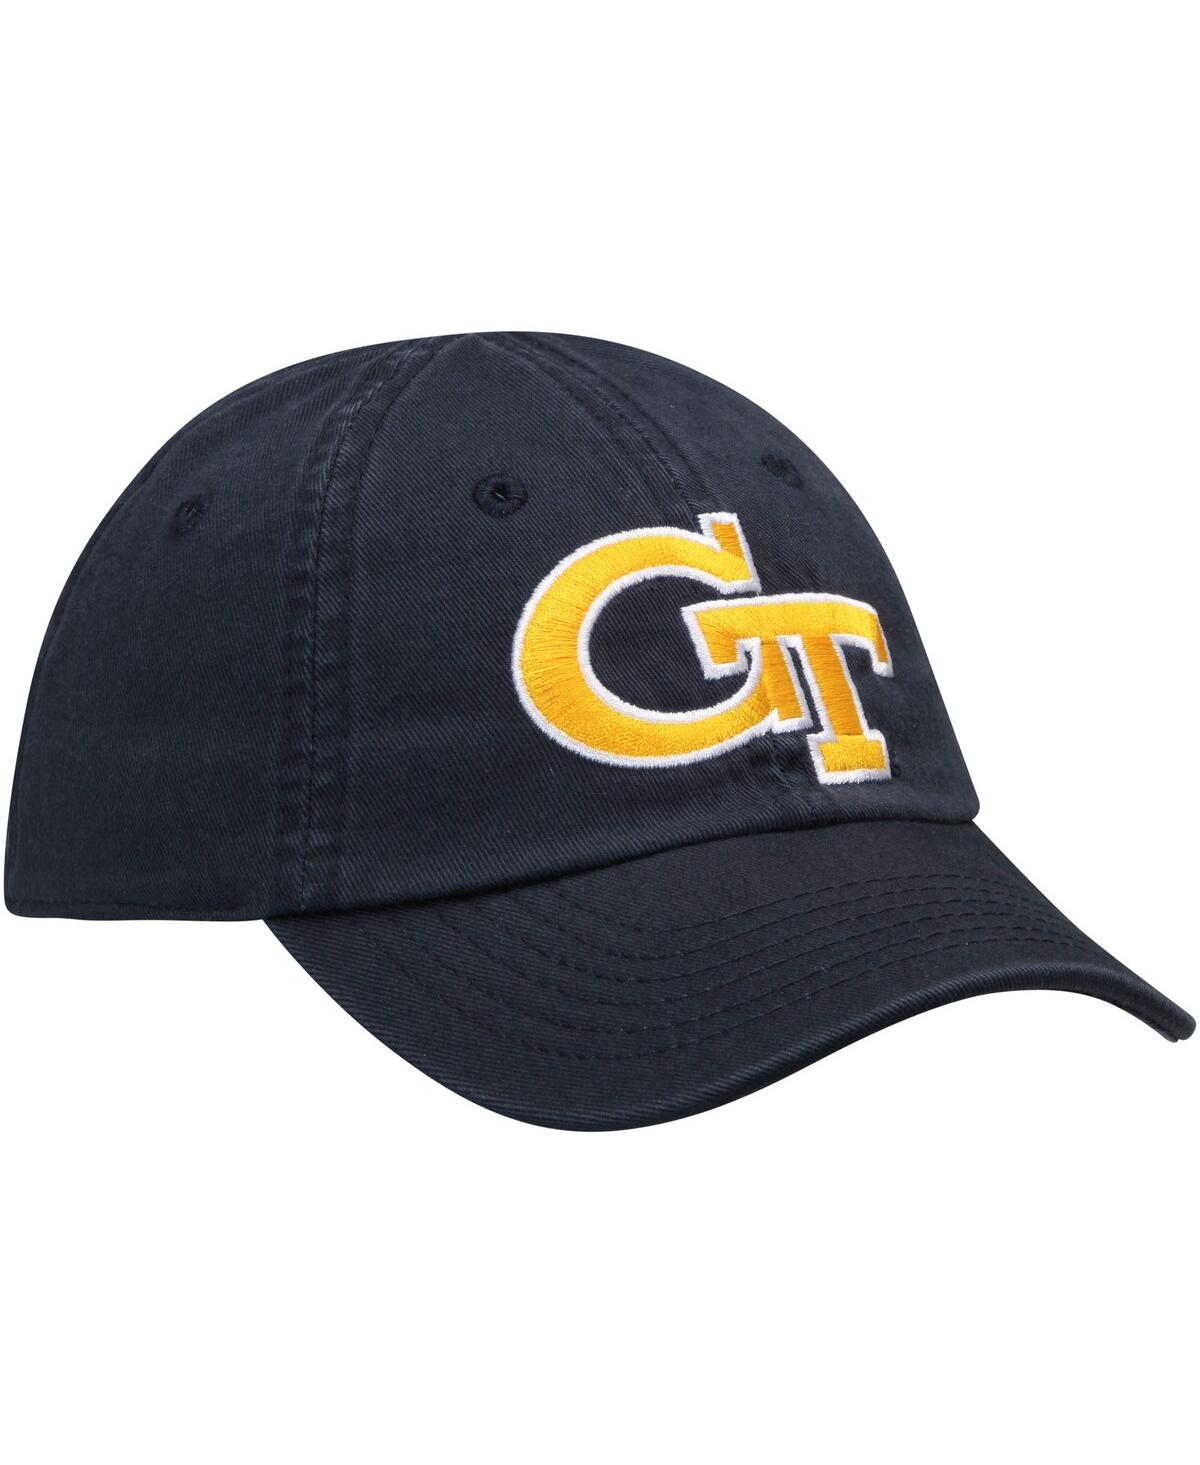 Shop Top Of The World Infant Boys And Girls  Navy Georgia Tech Yellow Jackets Mini Me Adjustable Hat